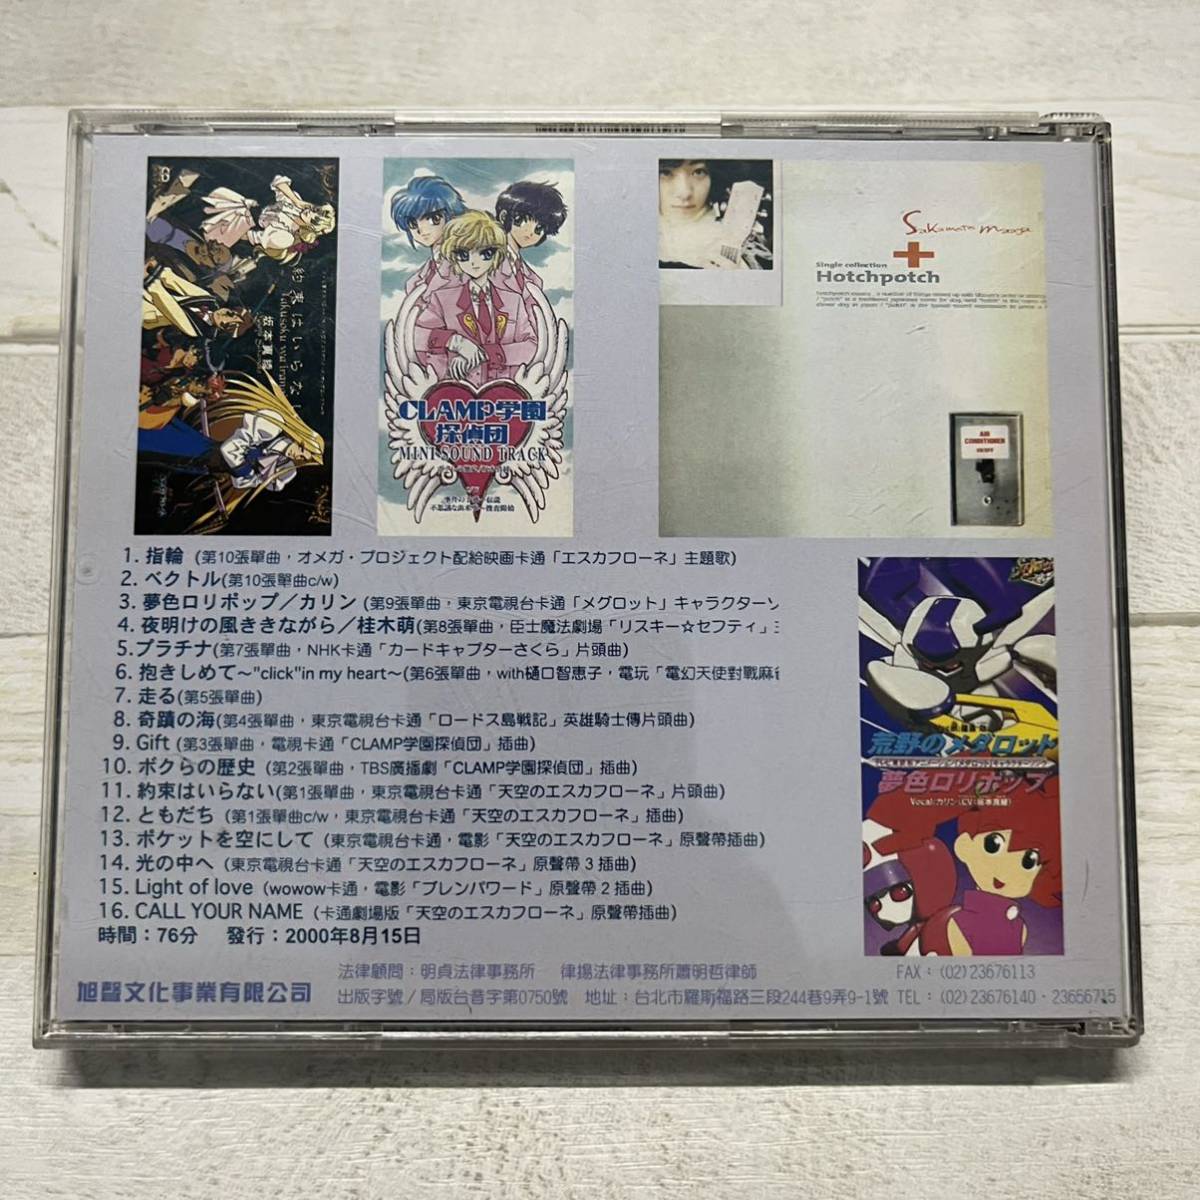 CD Taiwan record rare rare with belt Sakamoto genuine . complete set of works 